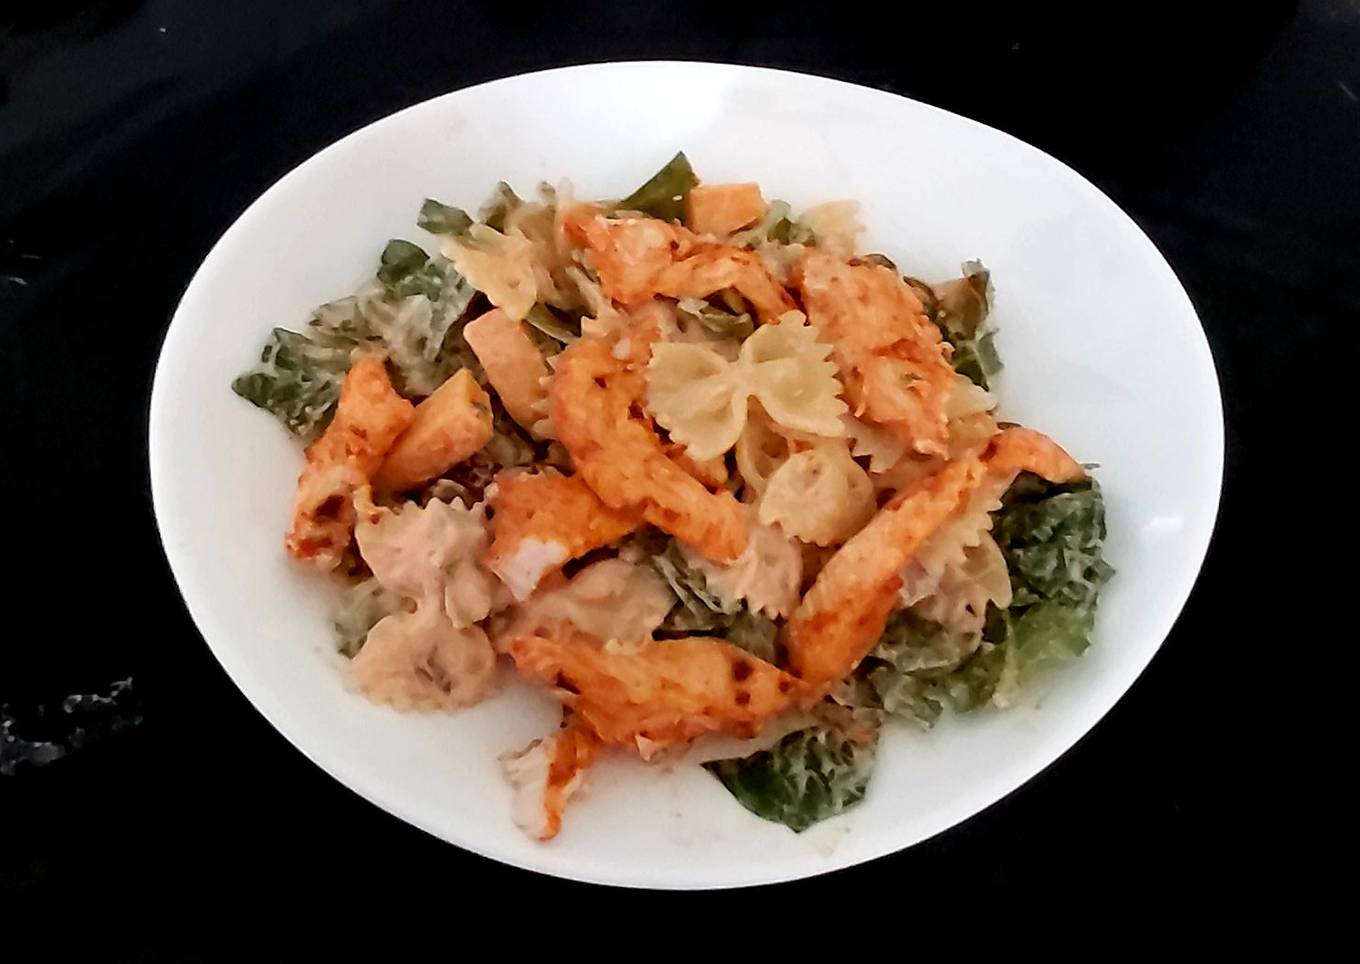 My Steamed Red Peppered Chicken & farfalle pasta Salad